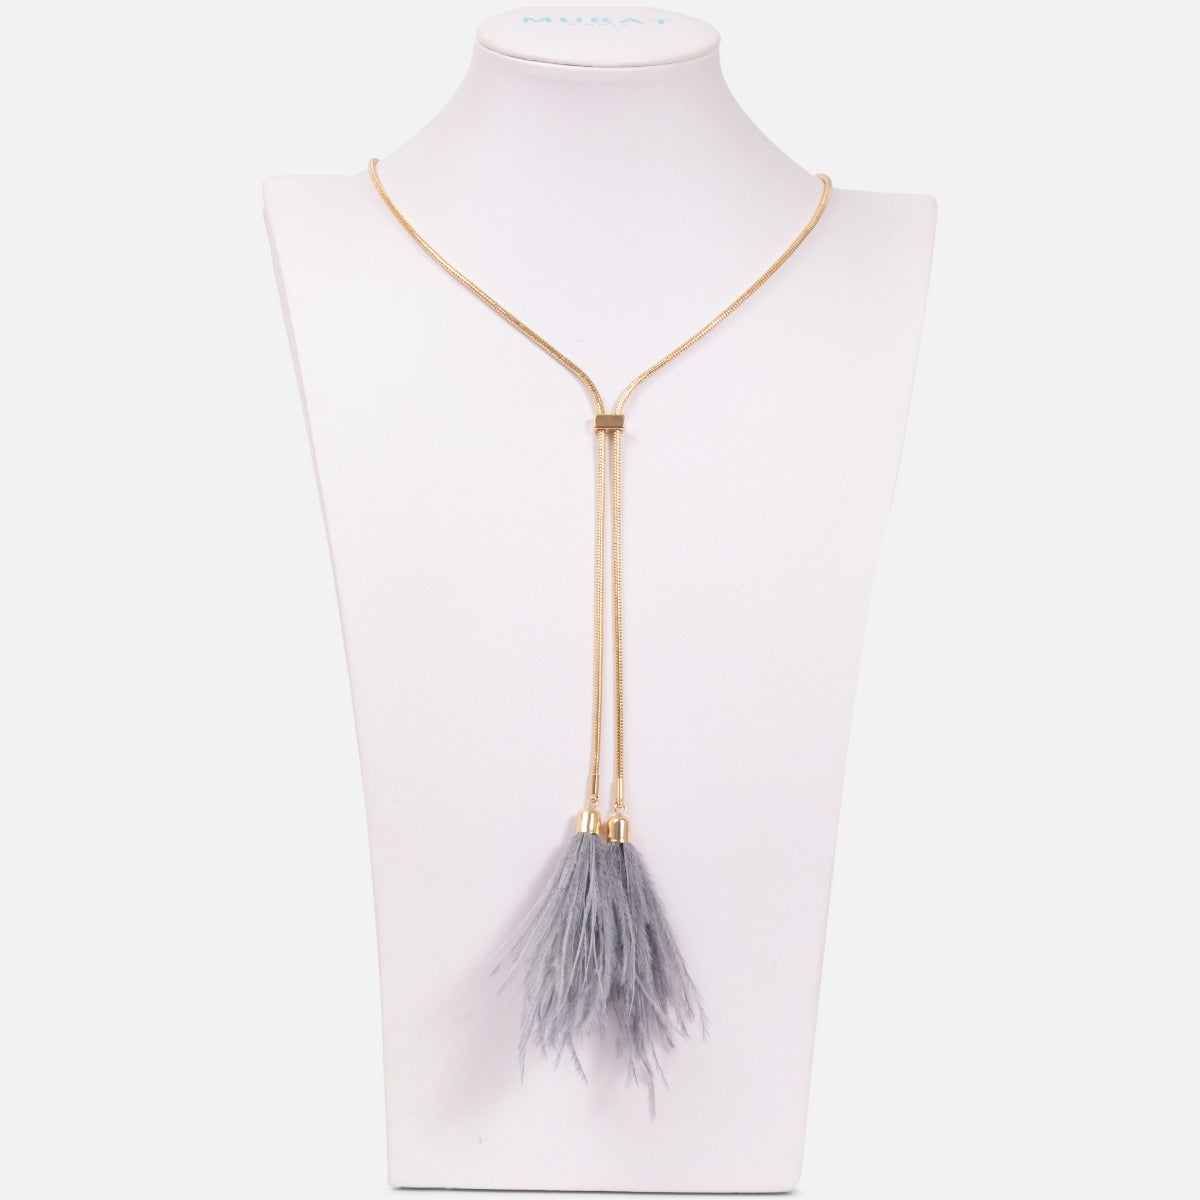 Adjustable ''y'' shaped necklace with grey feathers